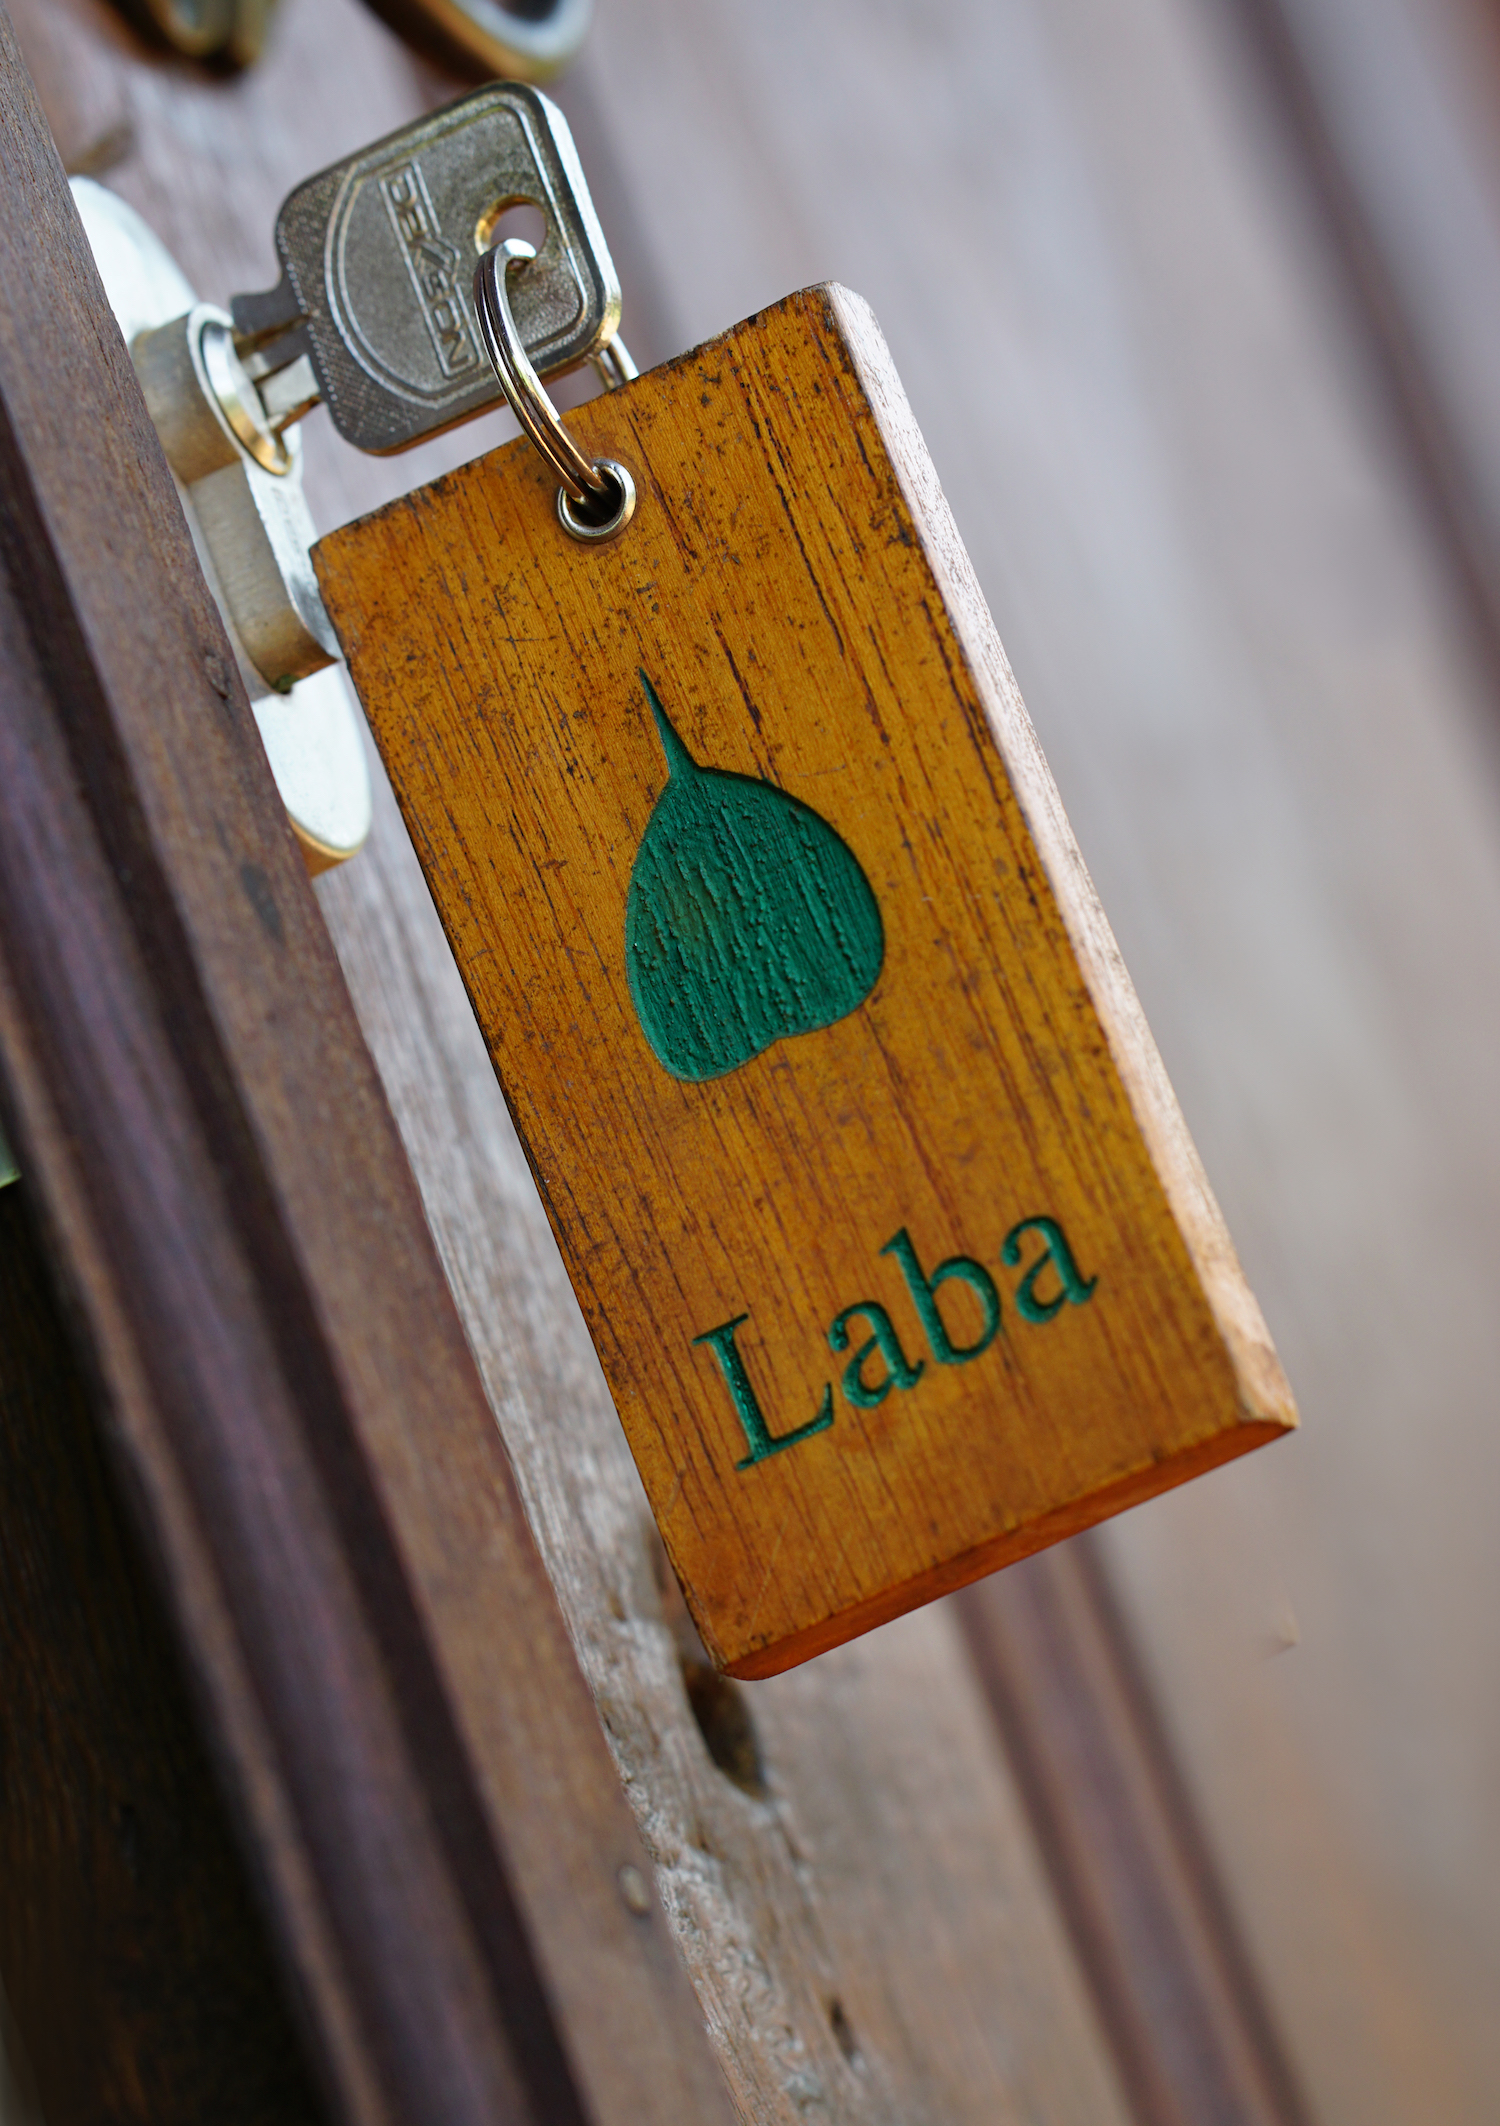 Welcome to Laba cottage.